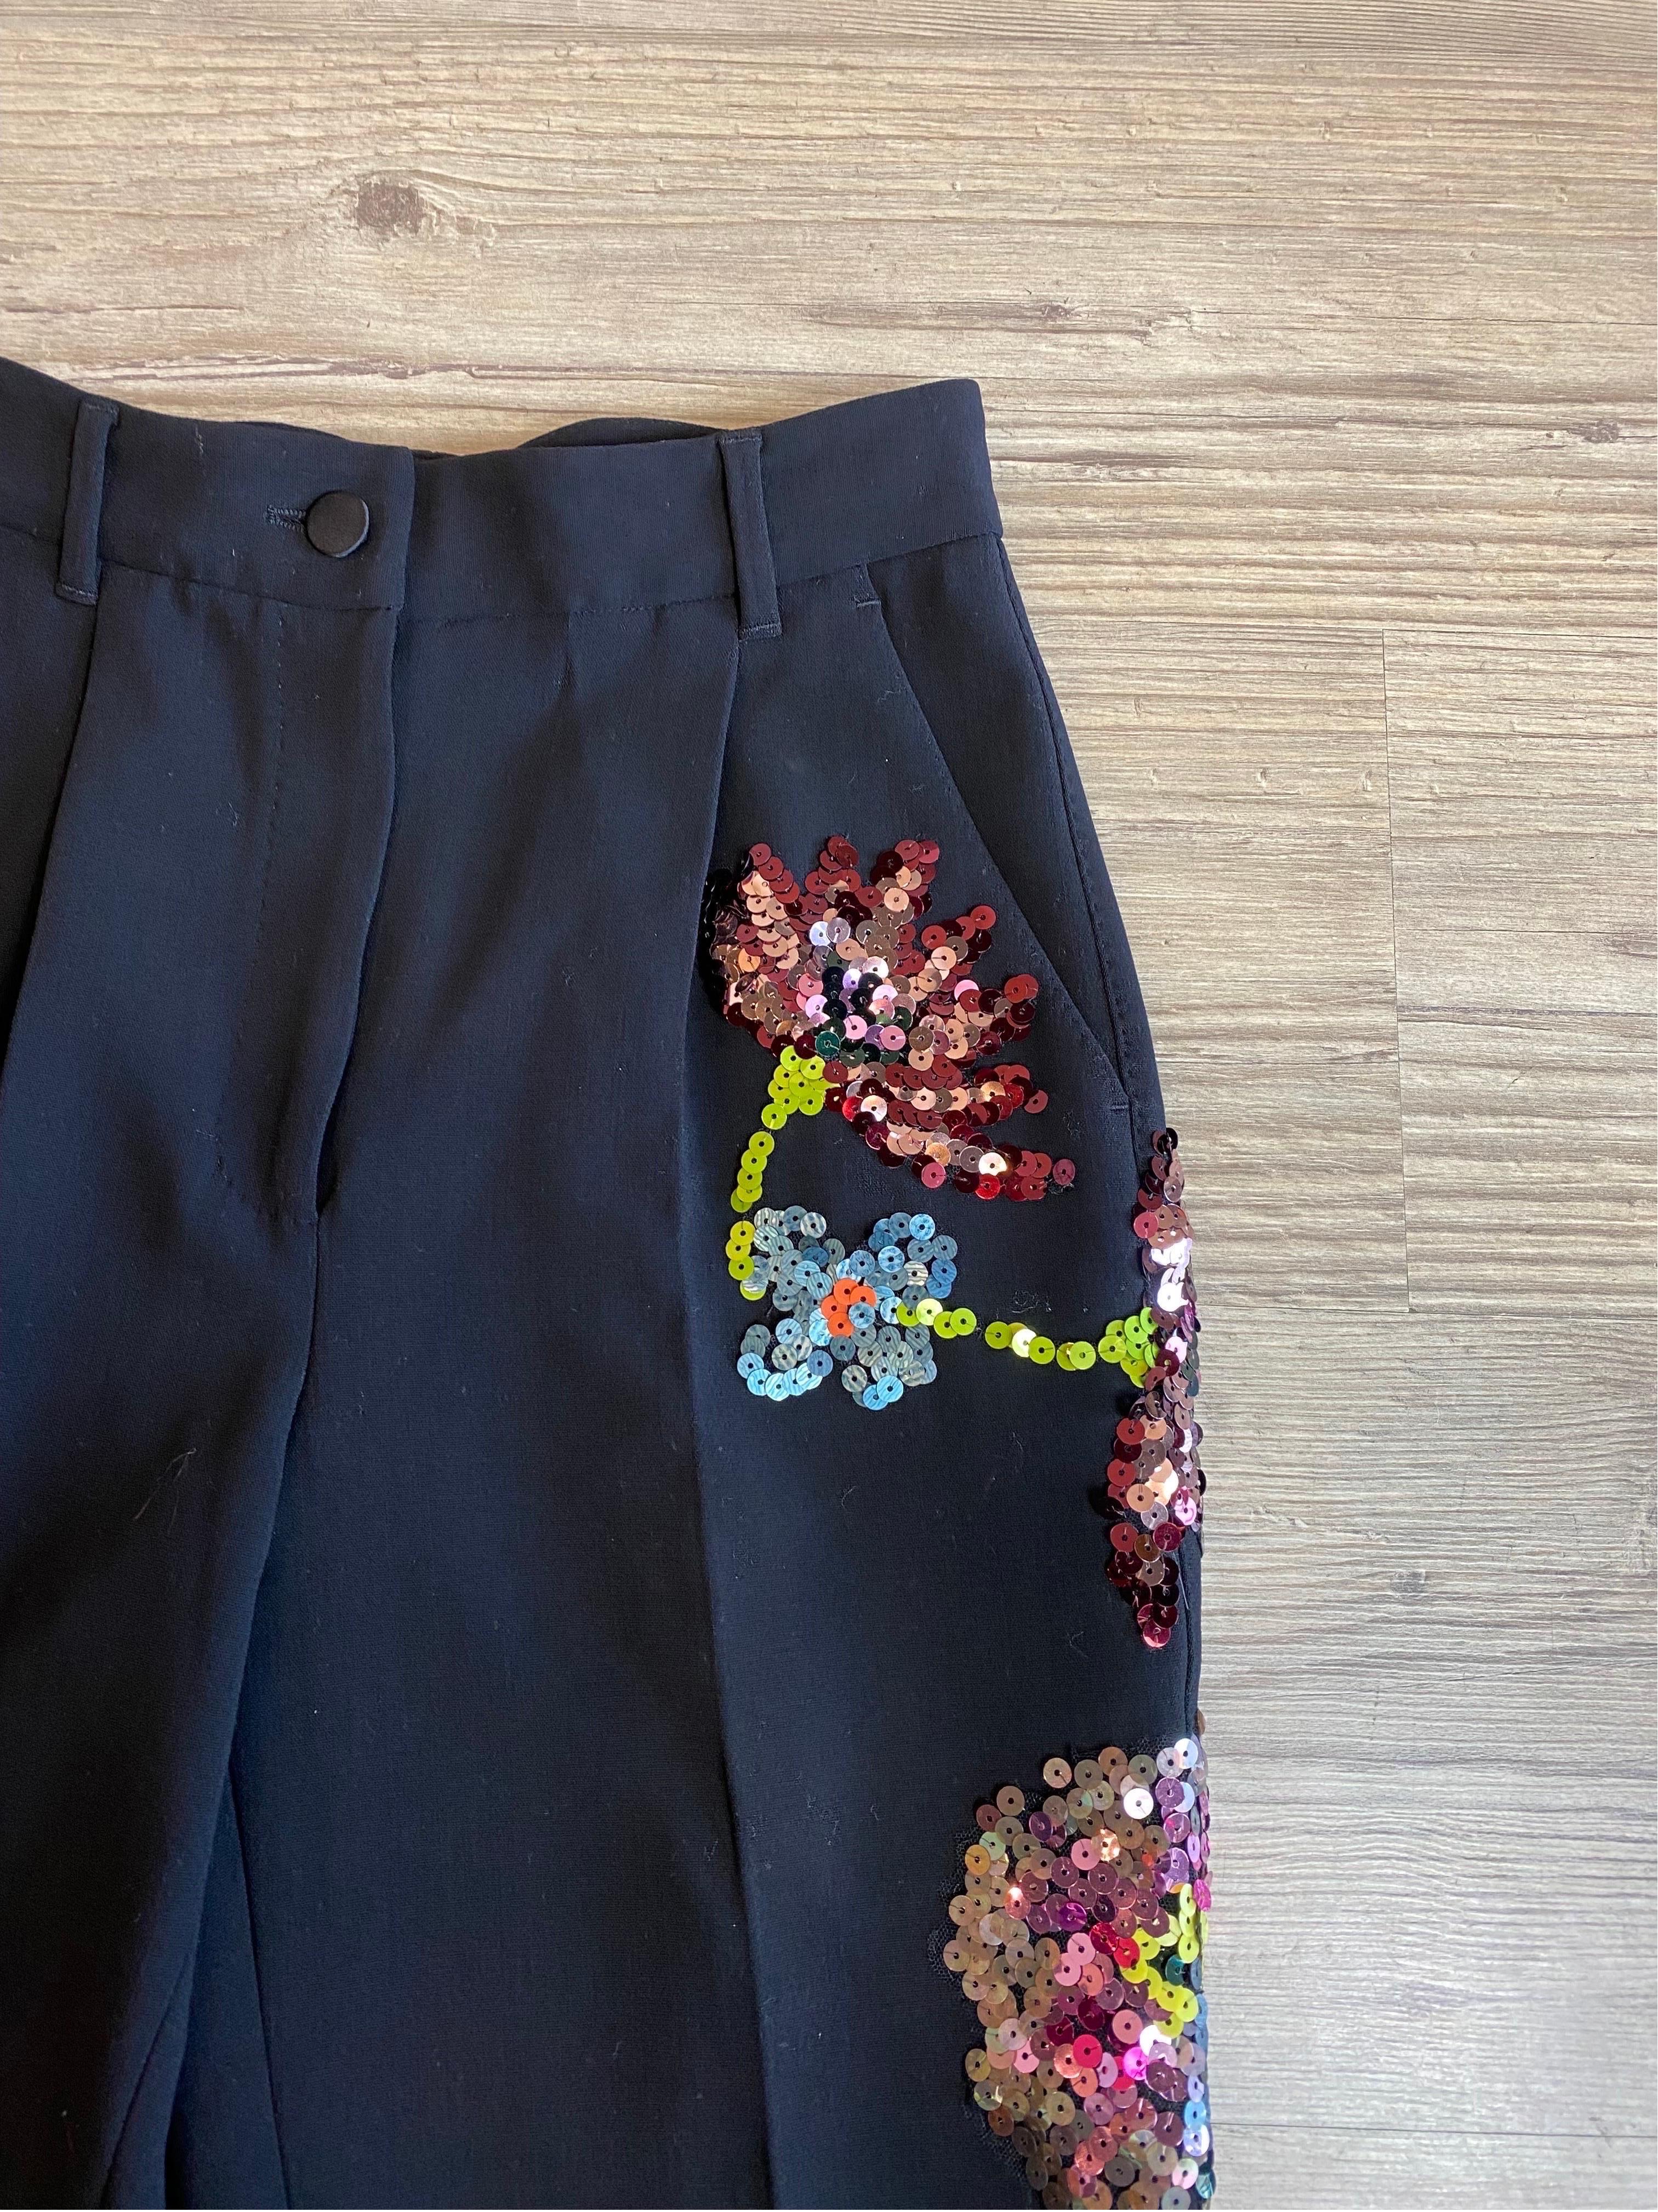 Dolce and Gabbana trousers.
In virgin wool and polyester.
Floral strass detail on one leg.
Italian size 38.
Waist 32cm
Length 92 cm
Second hand item but in excellent condition, with minimal signs of normal use.